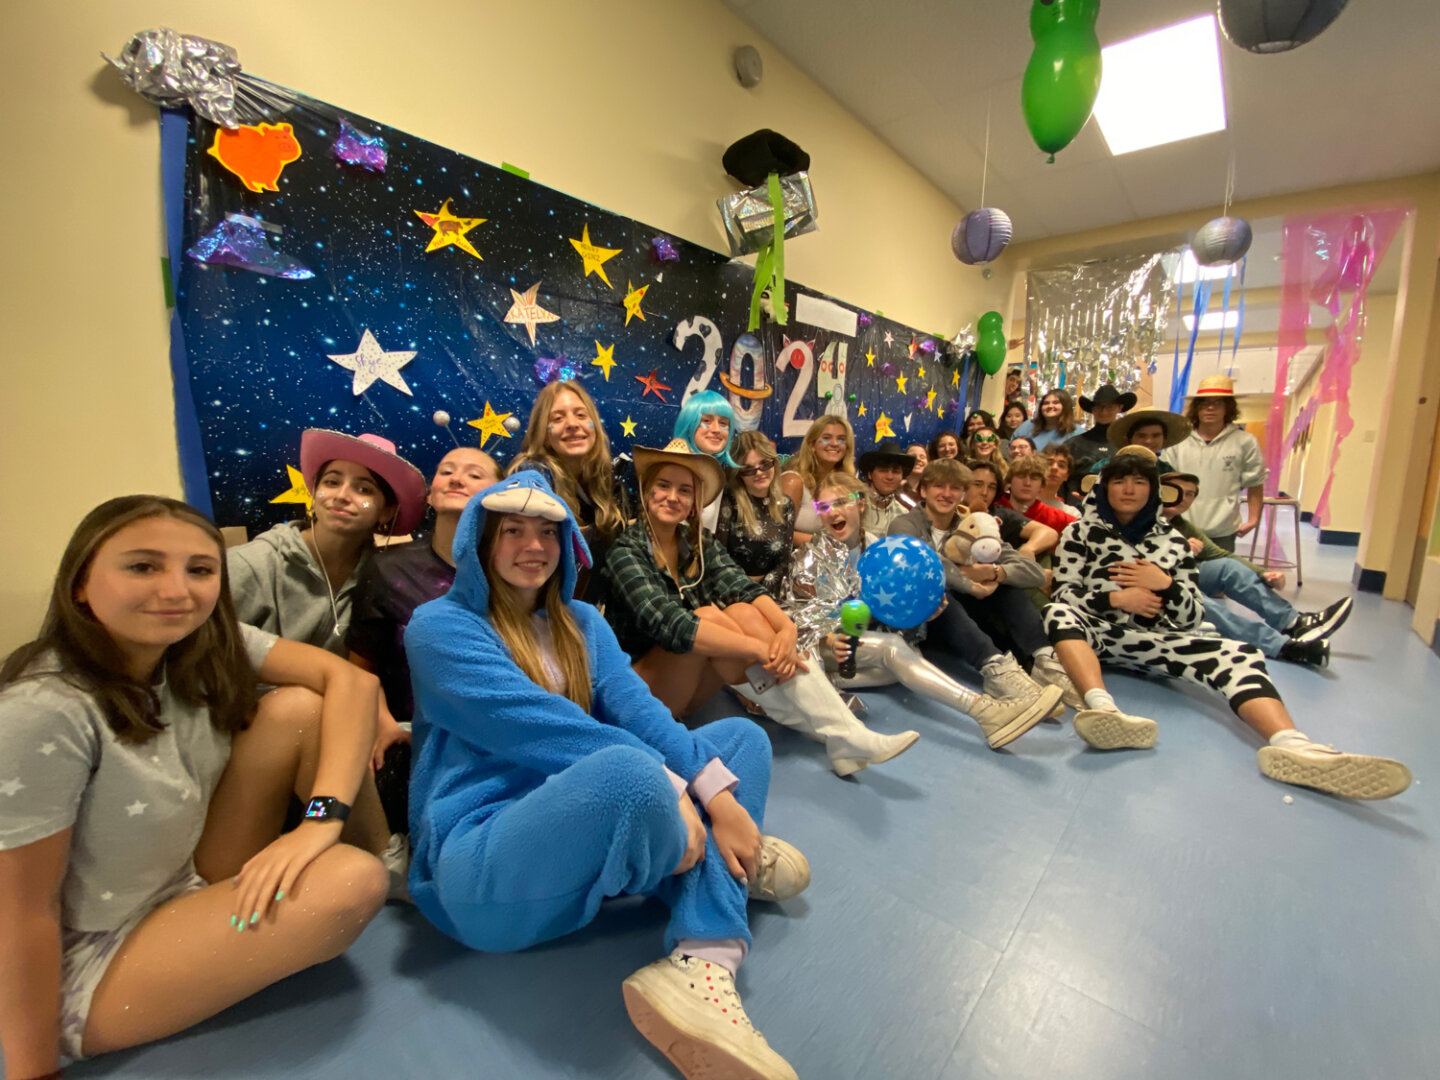 Williams School students sit on the floor in front of their 2024 mural during spirit week